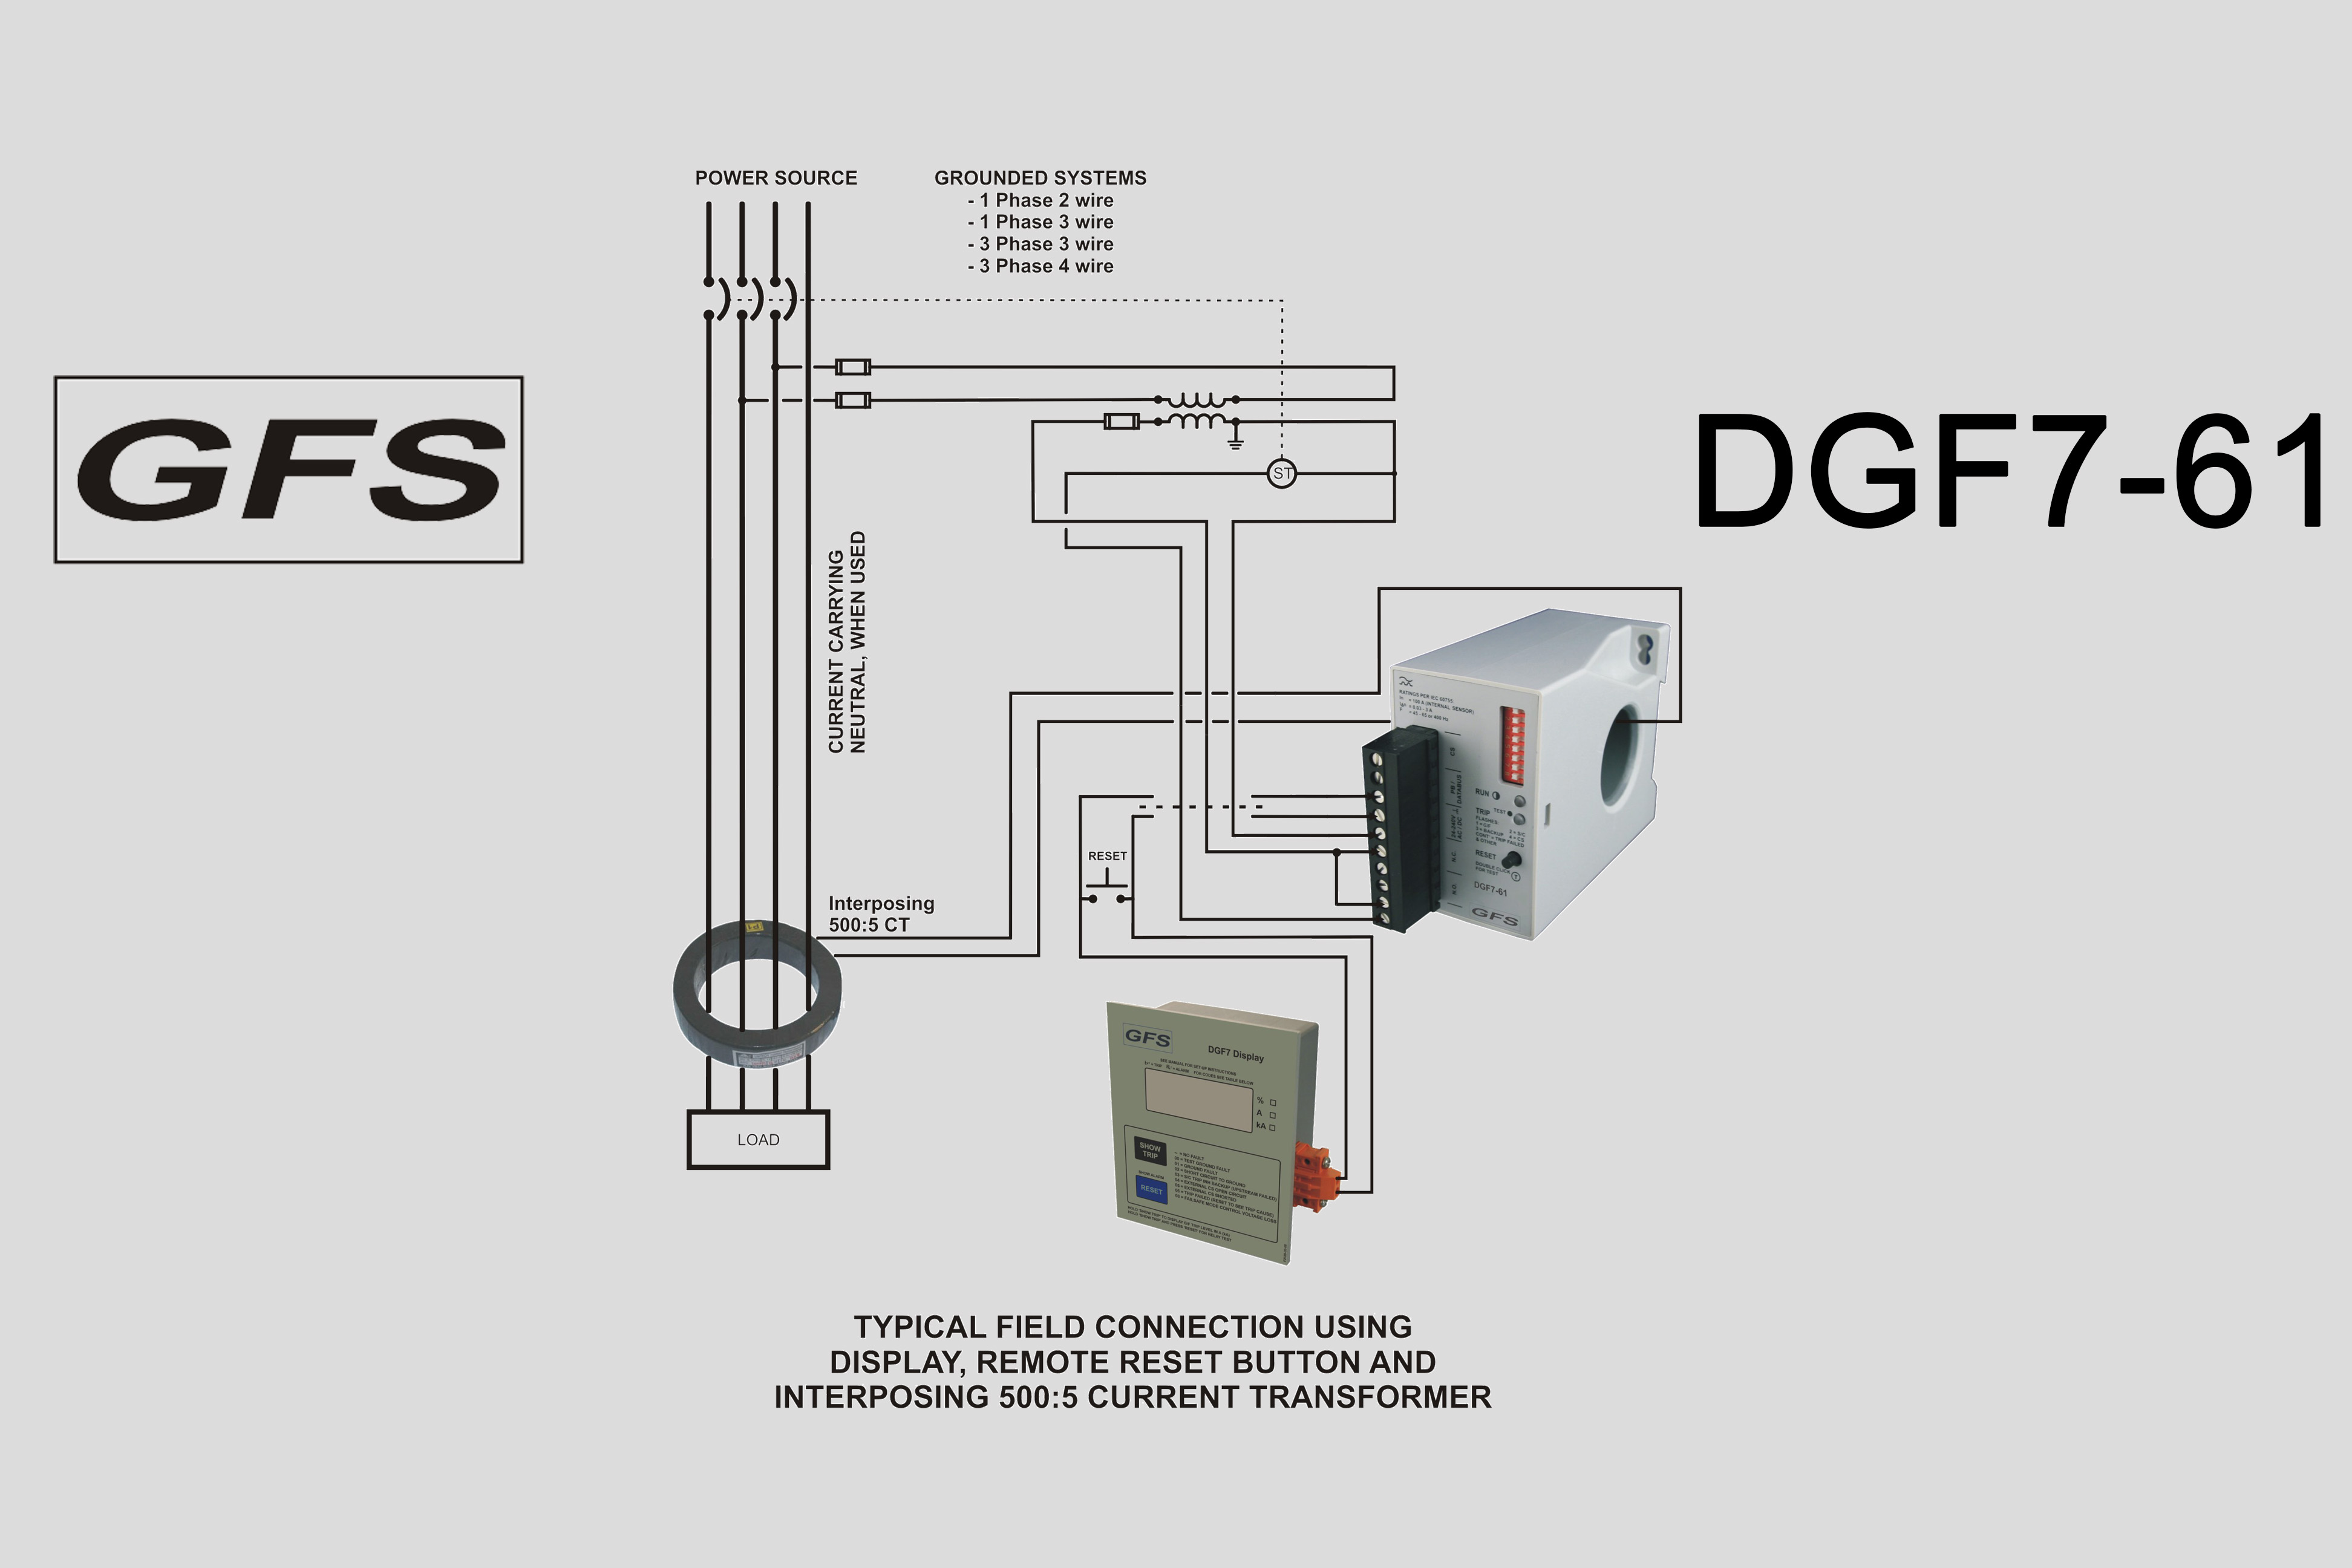 Ground Fault Relay DGF7-61 typical field connection using interposing current transformer